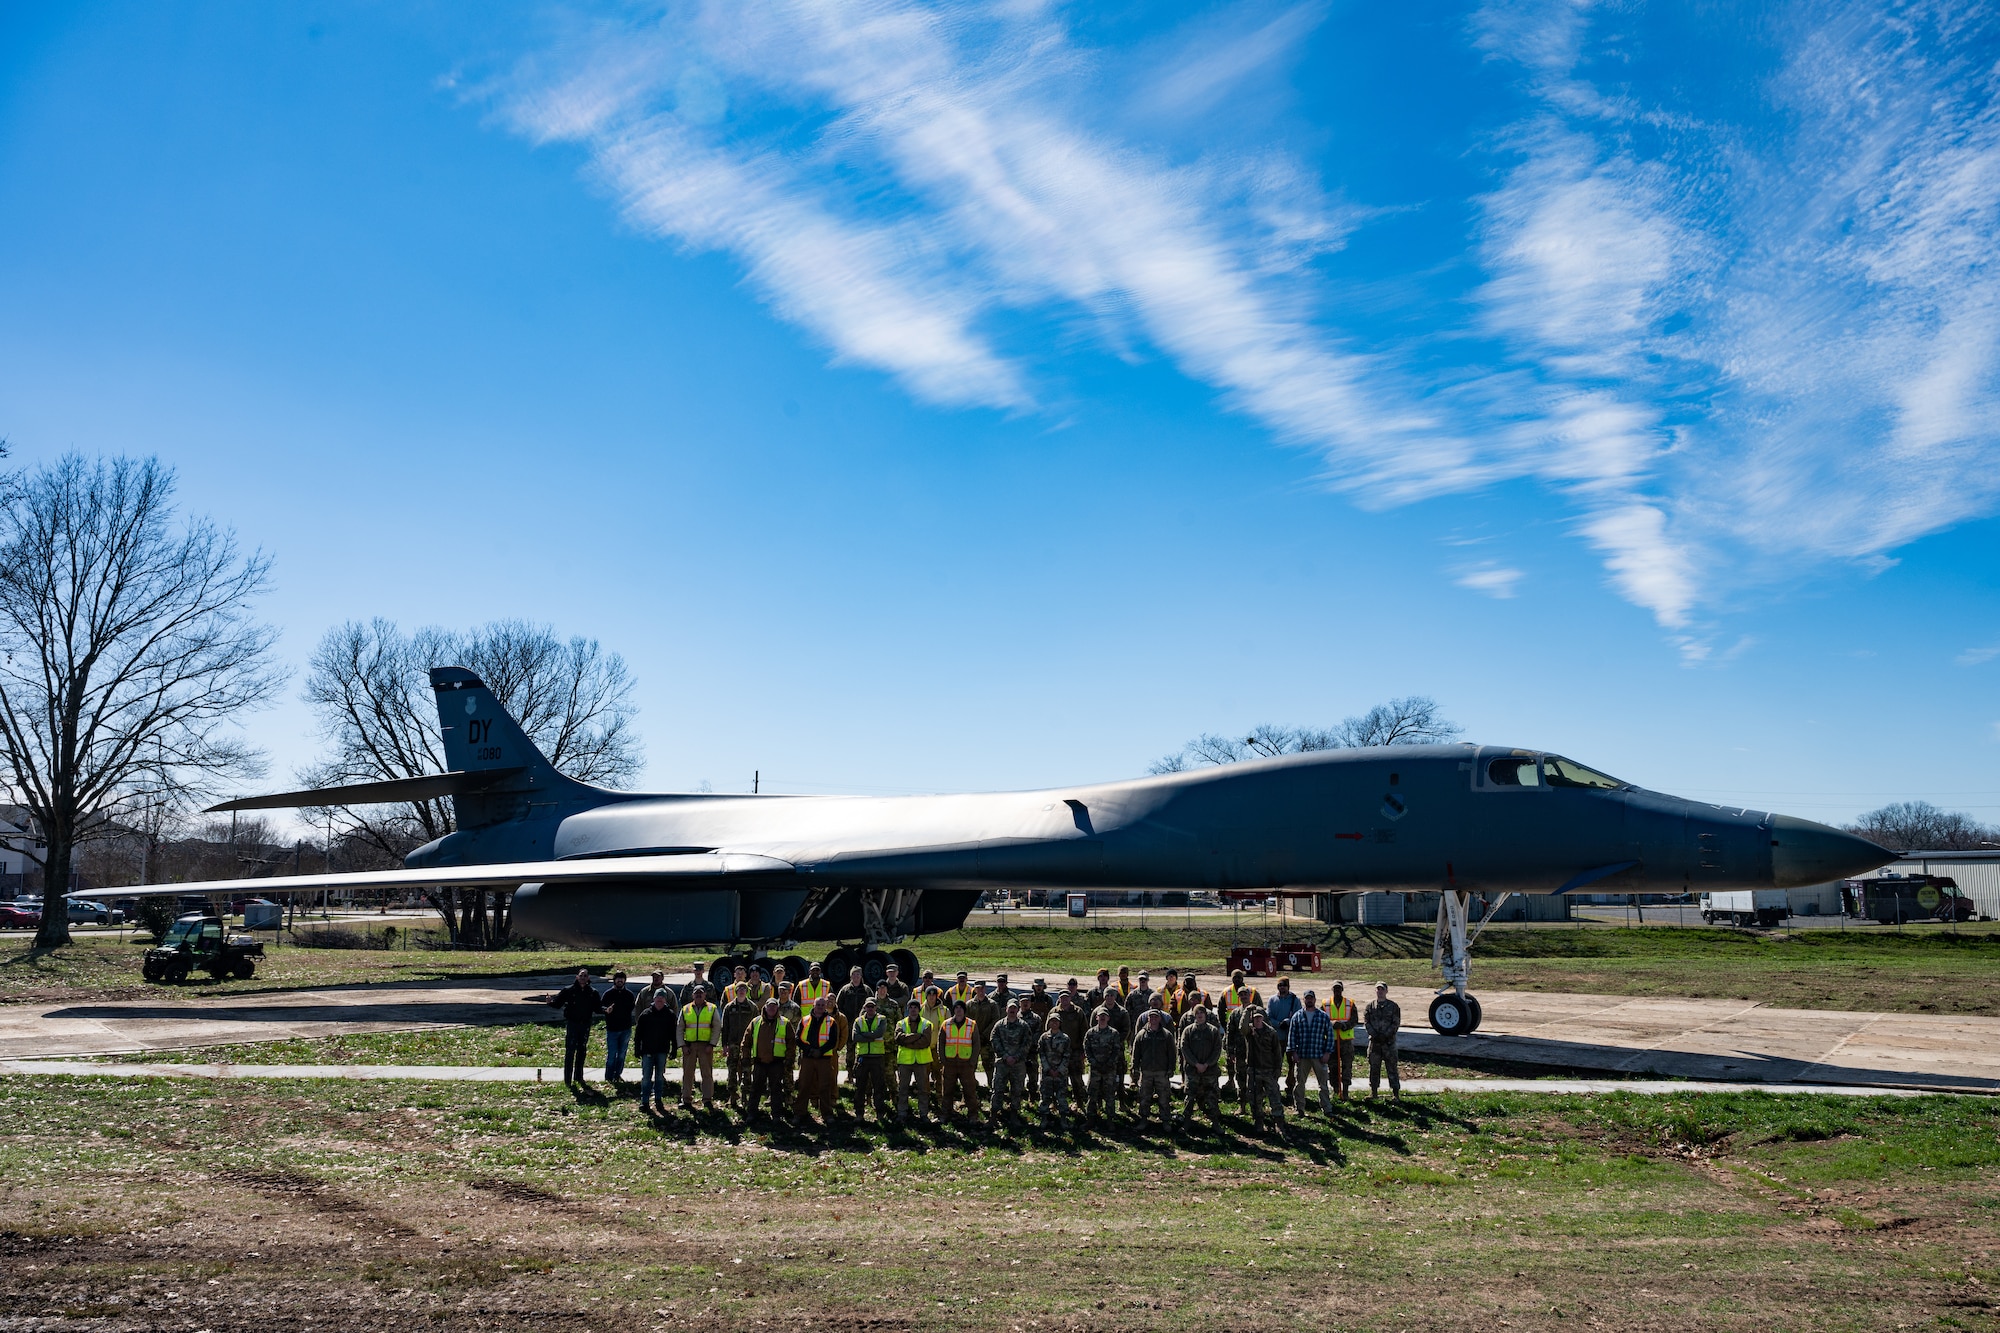 Approximately ten squadrons across the wing worked together to move the B-1 from the flightline to the Barksdale Global Power Museum.